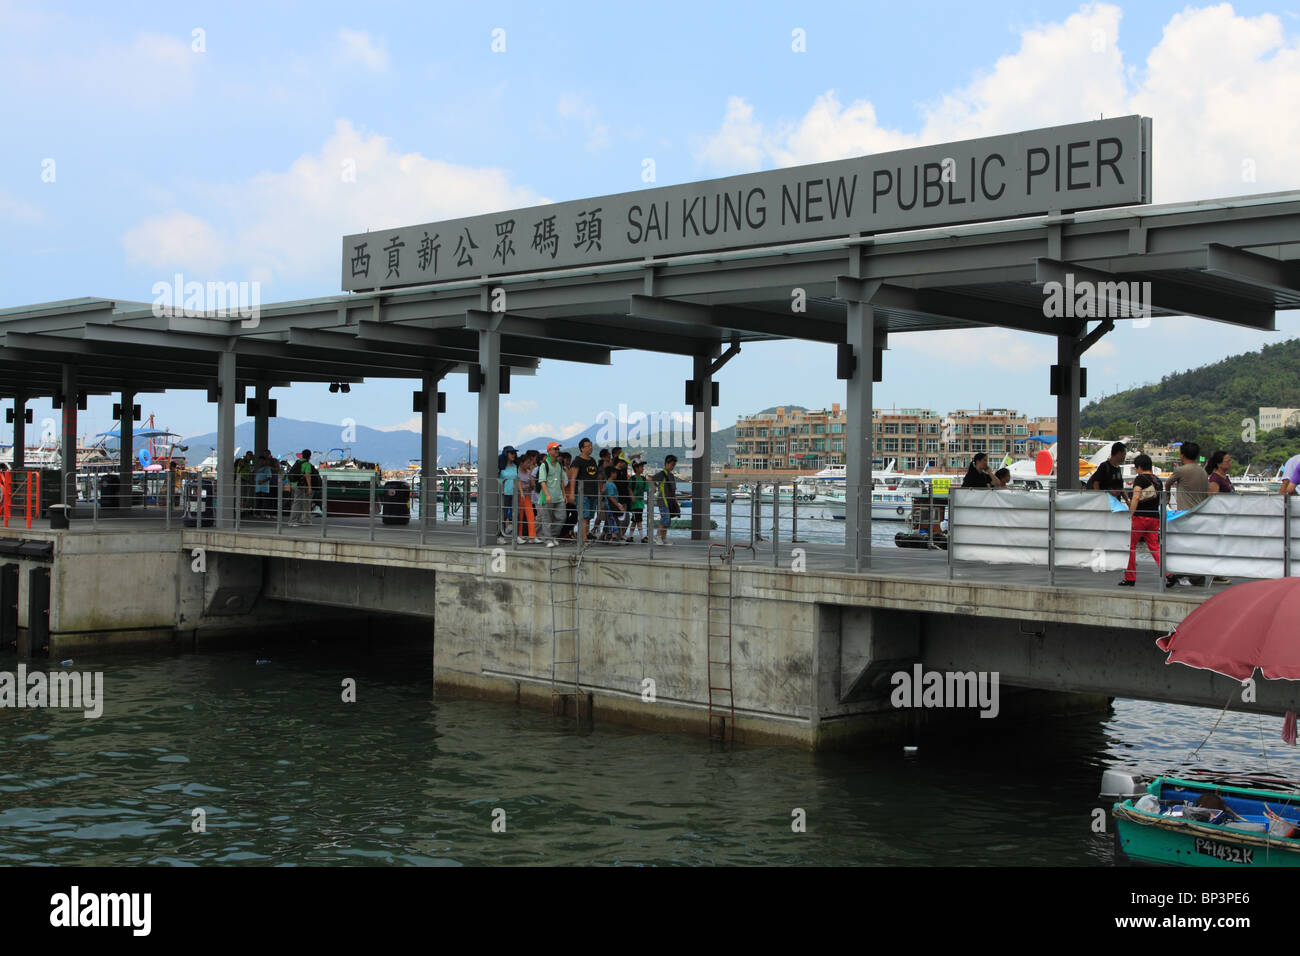 New Public Pier at Sai Kung in the New Territories, Hong Kong Stock Photo